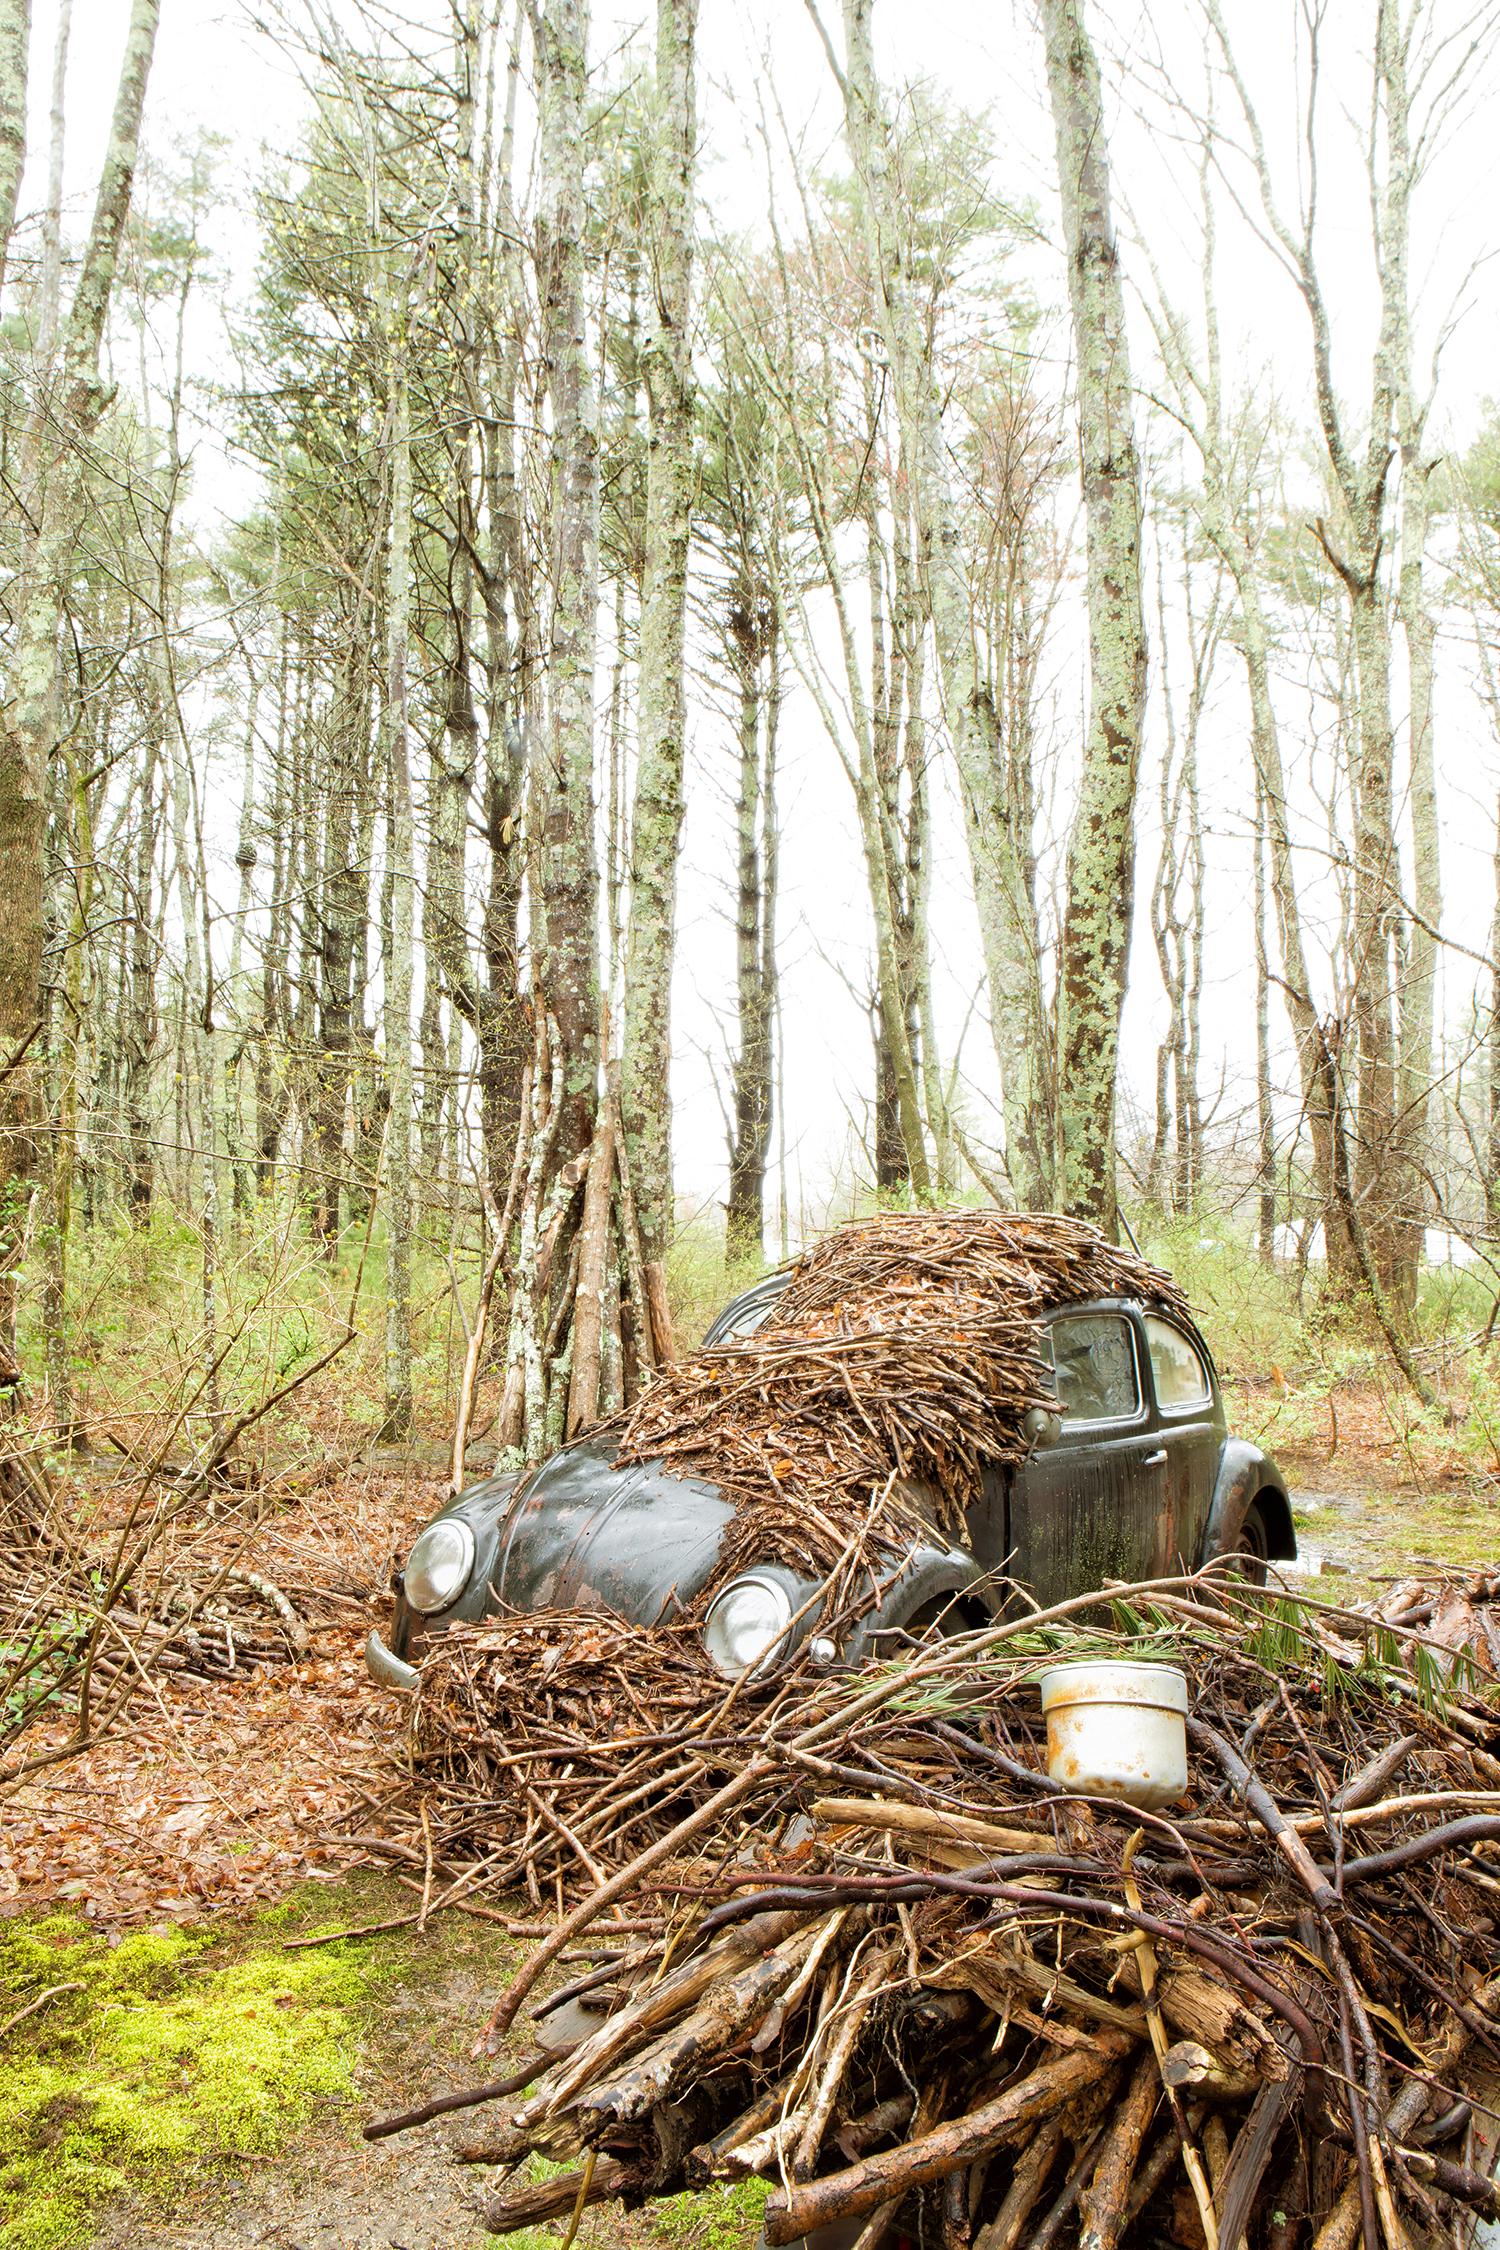 Color Photograph Rebecca Skinner - "Nesting", Contemporary, Voltswagen, paysage, VW, photographie couleur, impression